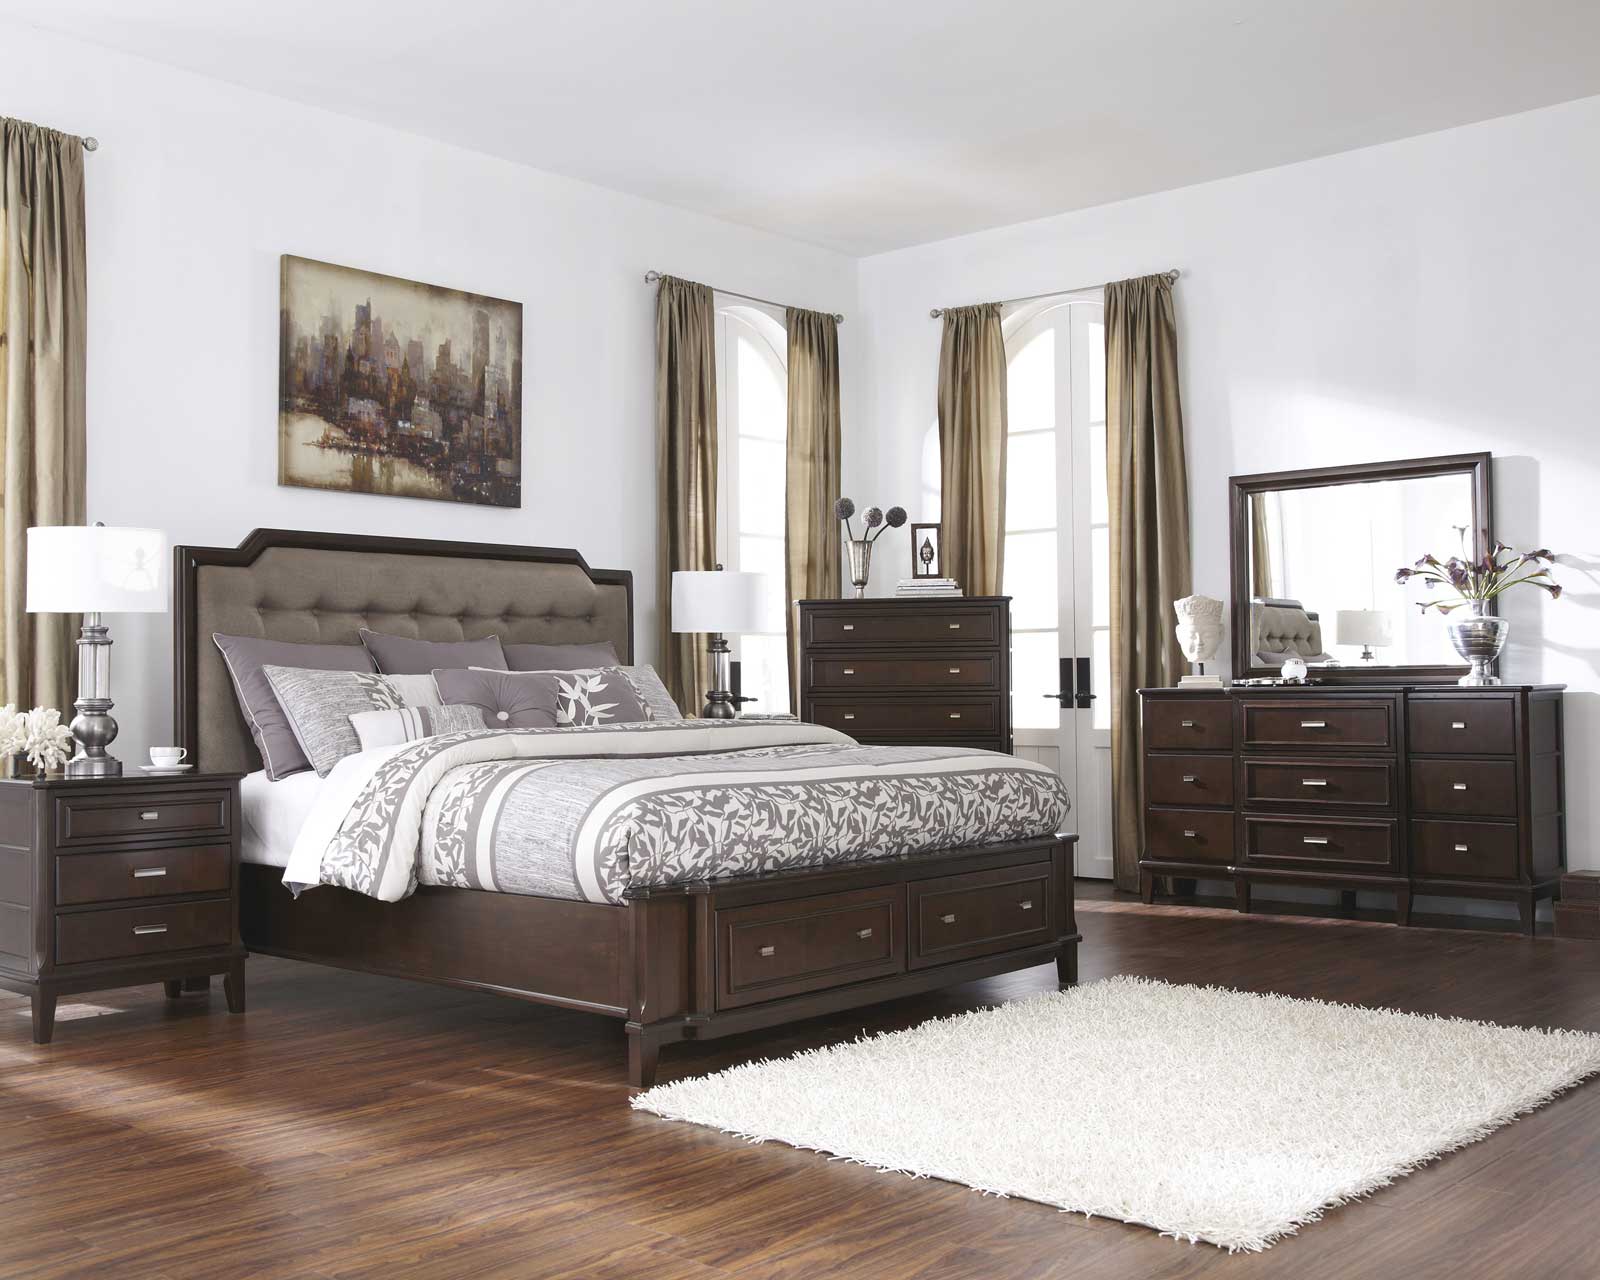 King Bedroom Design Interesting King Bedroom Sets Layout Design Ideas With Classy Dark Wooden Bedroom Storage Design And Charming White Colored Feather Carpet Idea Also Adorable Bed Spread Ideas Bedroom Enhance The King Bedroom Sets: The Soft Vineyard-6